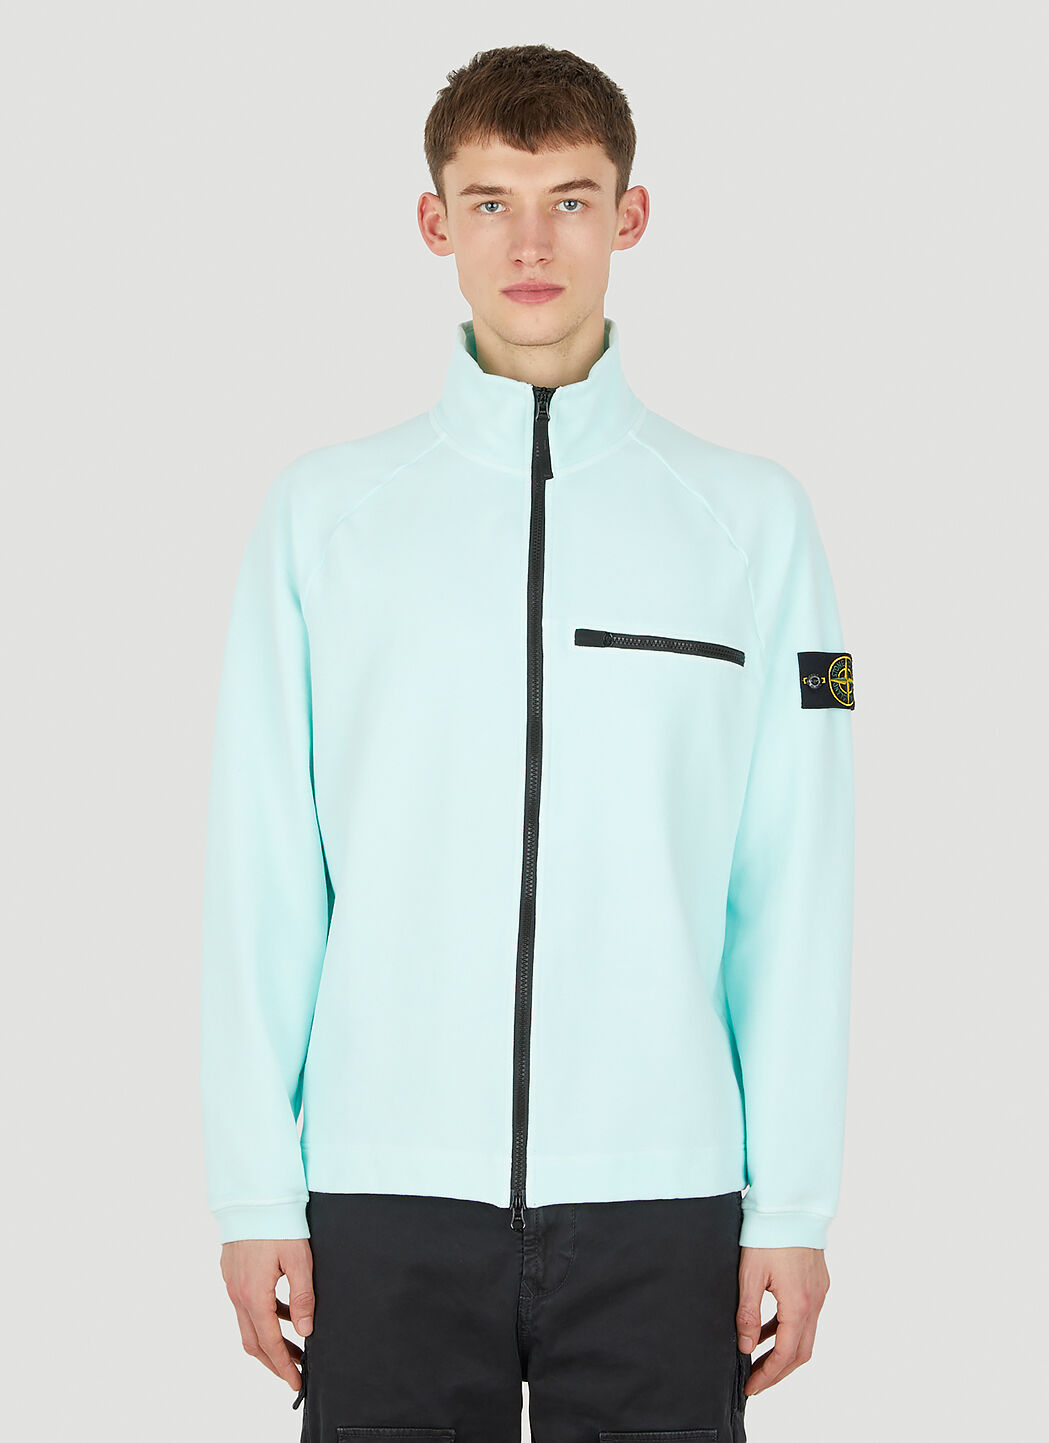 Stone Island Compass Patch Track Jacket in Light Blue | LN-CC®